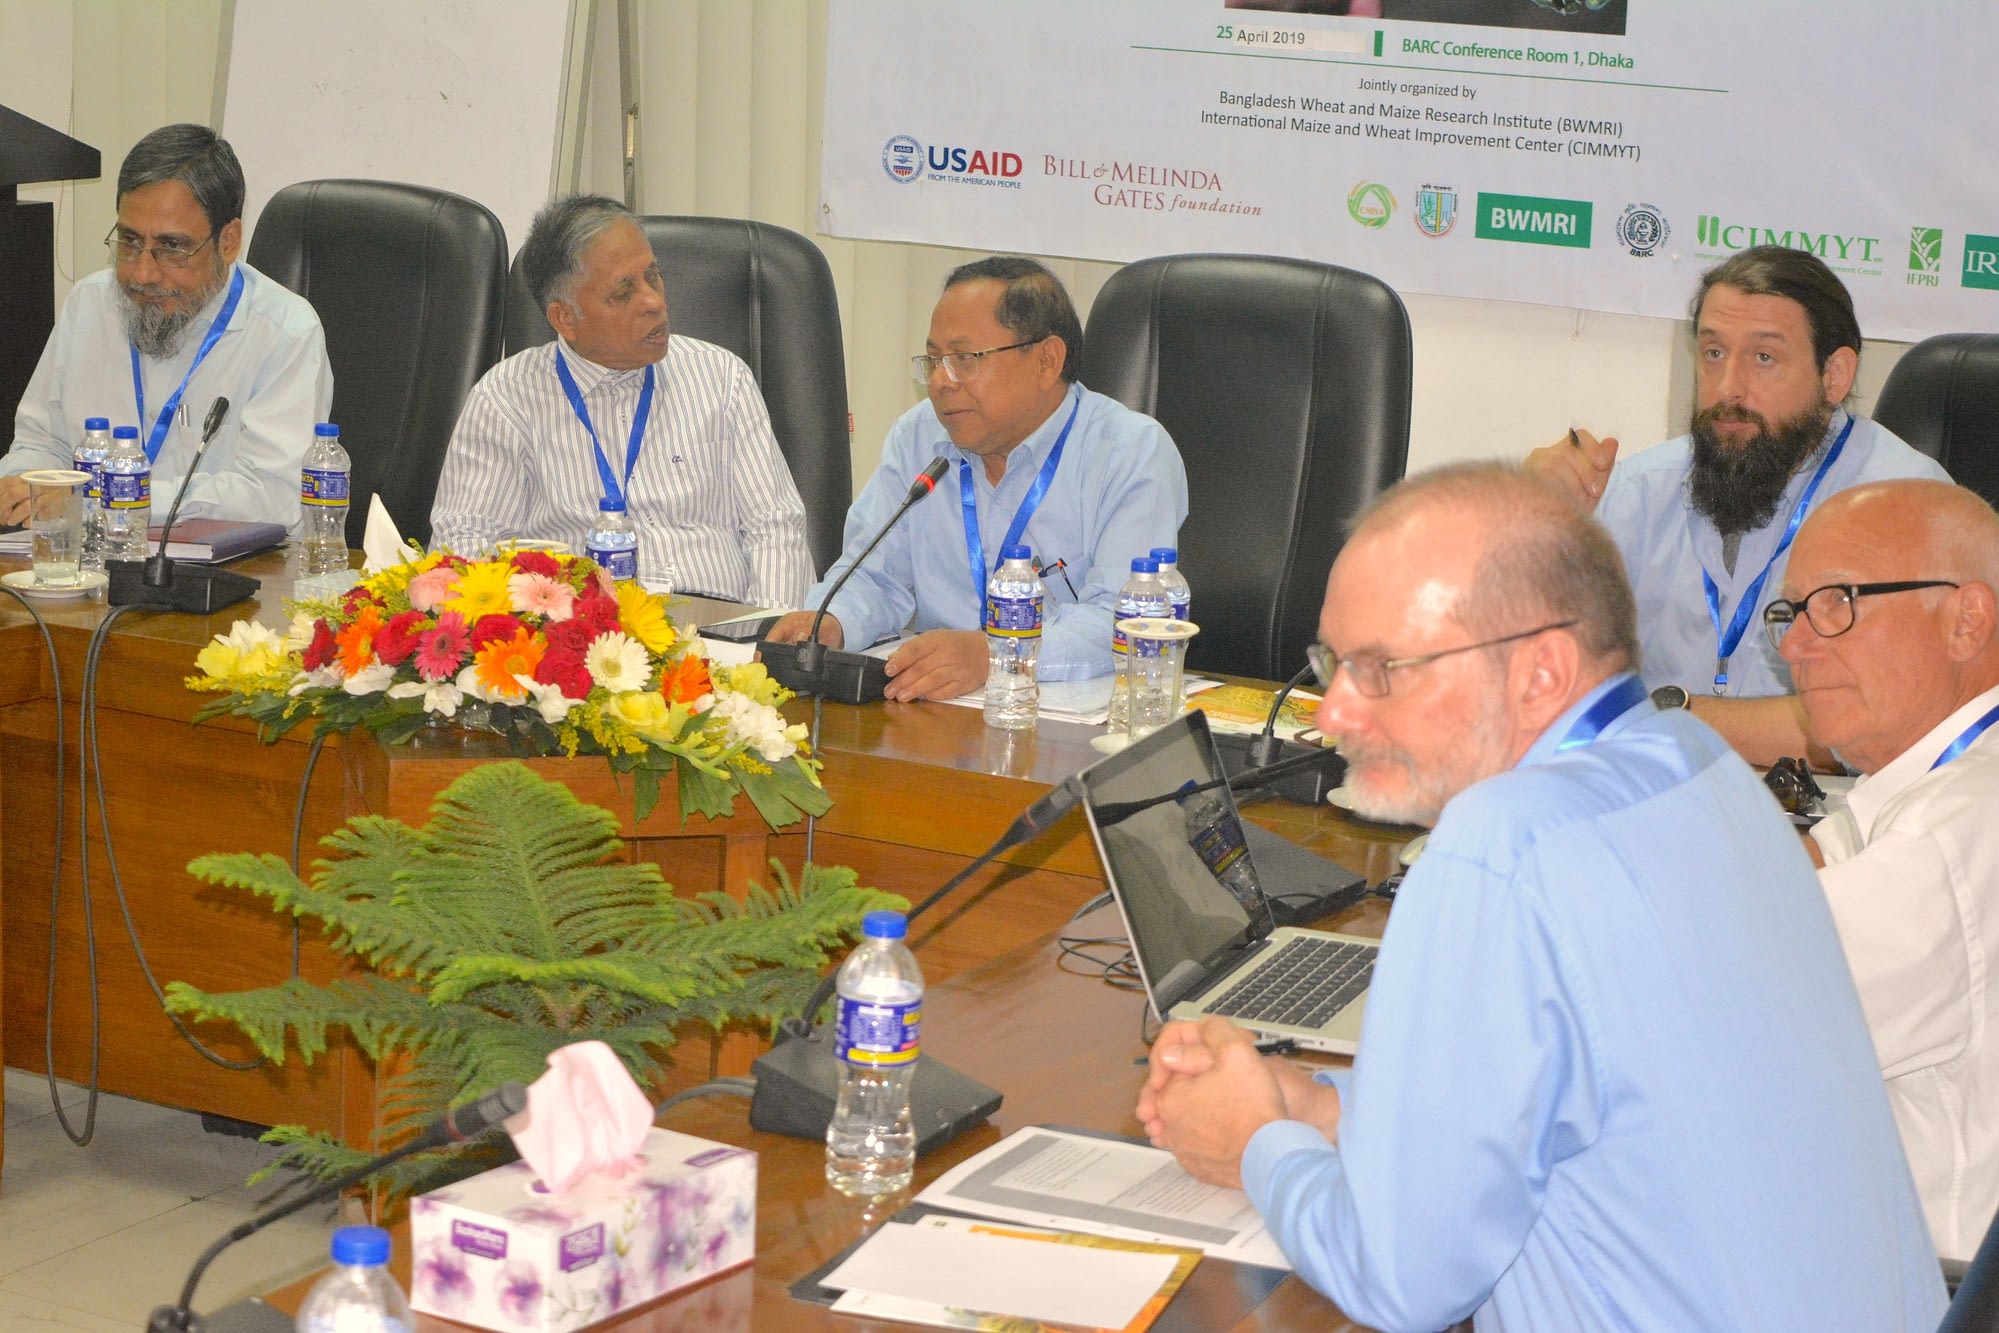 Researchers, policymakers and other agricultural partners participated in the workshop on fall armyworm. (Photo: Uttam/CIMMYT)